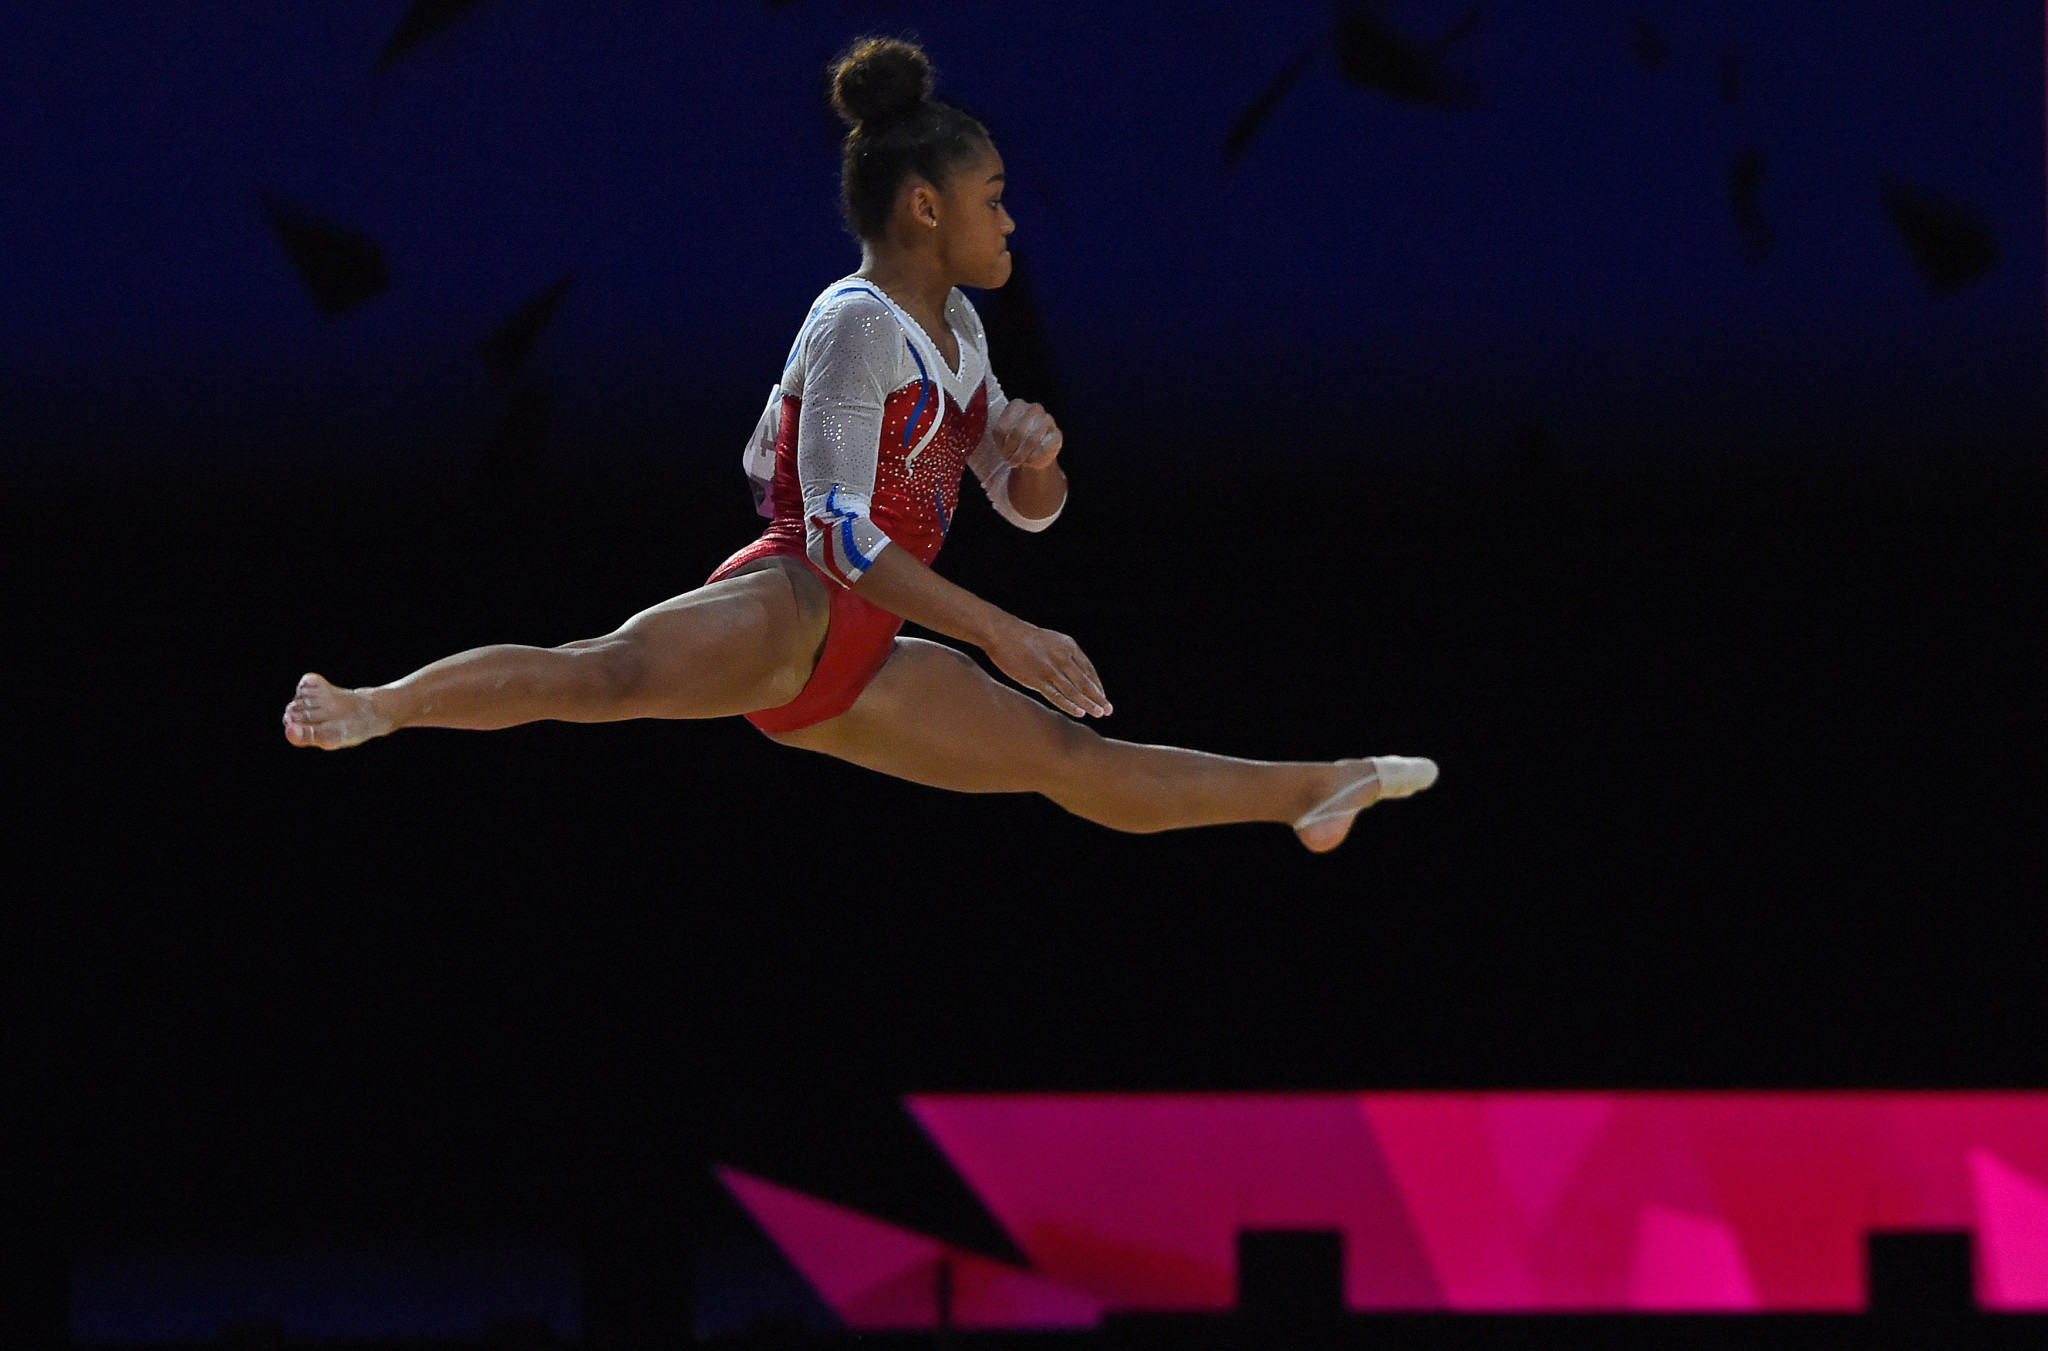 France's Mélanie de Jesus dos Santos came out on top in the floor exercise ©Getty Images